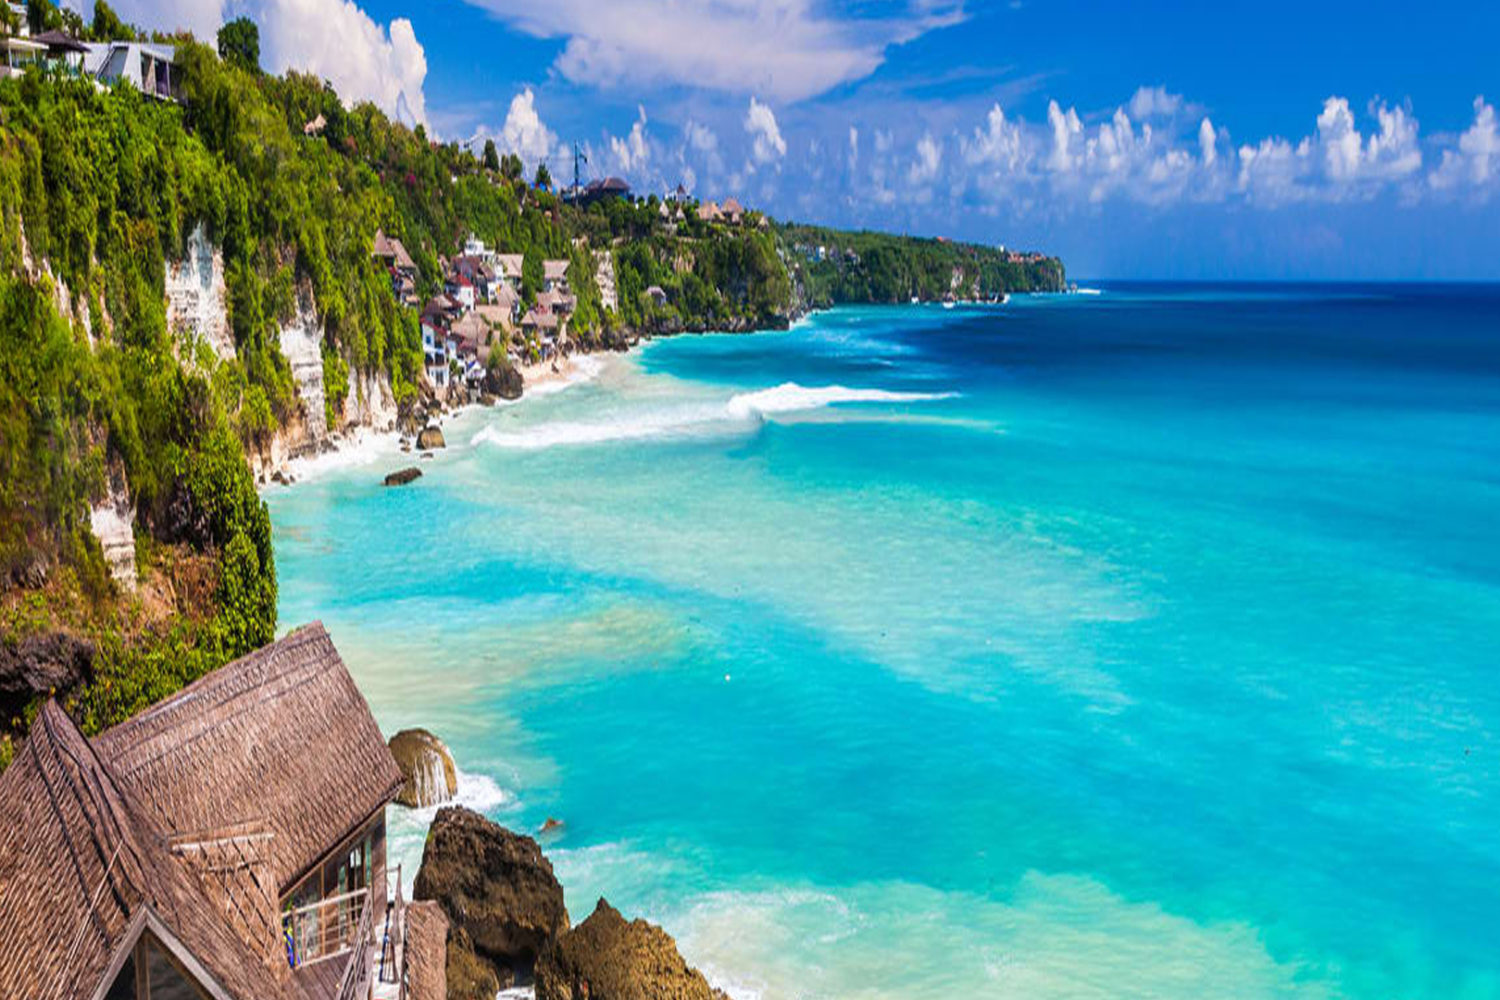 Bali Deluxe Tour Package 5 Nights